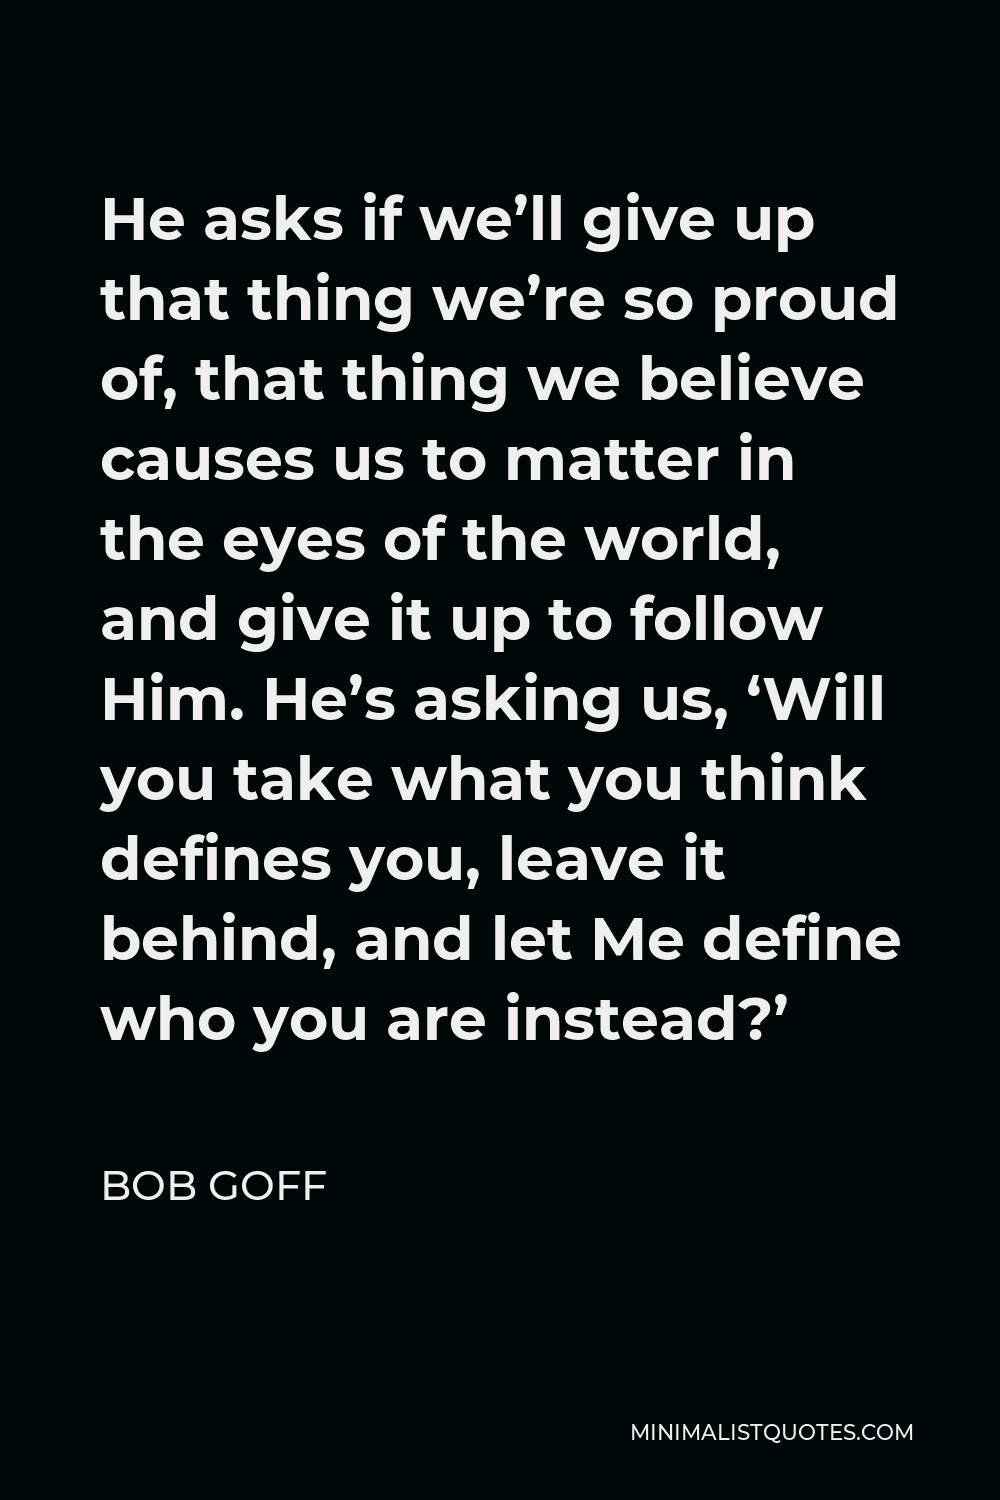 Bob Goff Quote - He asks if we’ll give up that thing we’re so proud of, that thing we believe causes us to matter in the eyes of the world, and give it up to follow Him. He’s asking us, ‘Will you take what you think defines you, leave it behind, and let Me define who you are instead?’